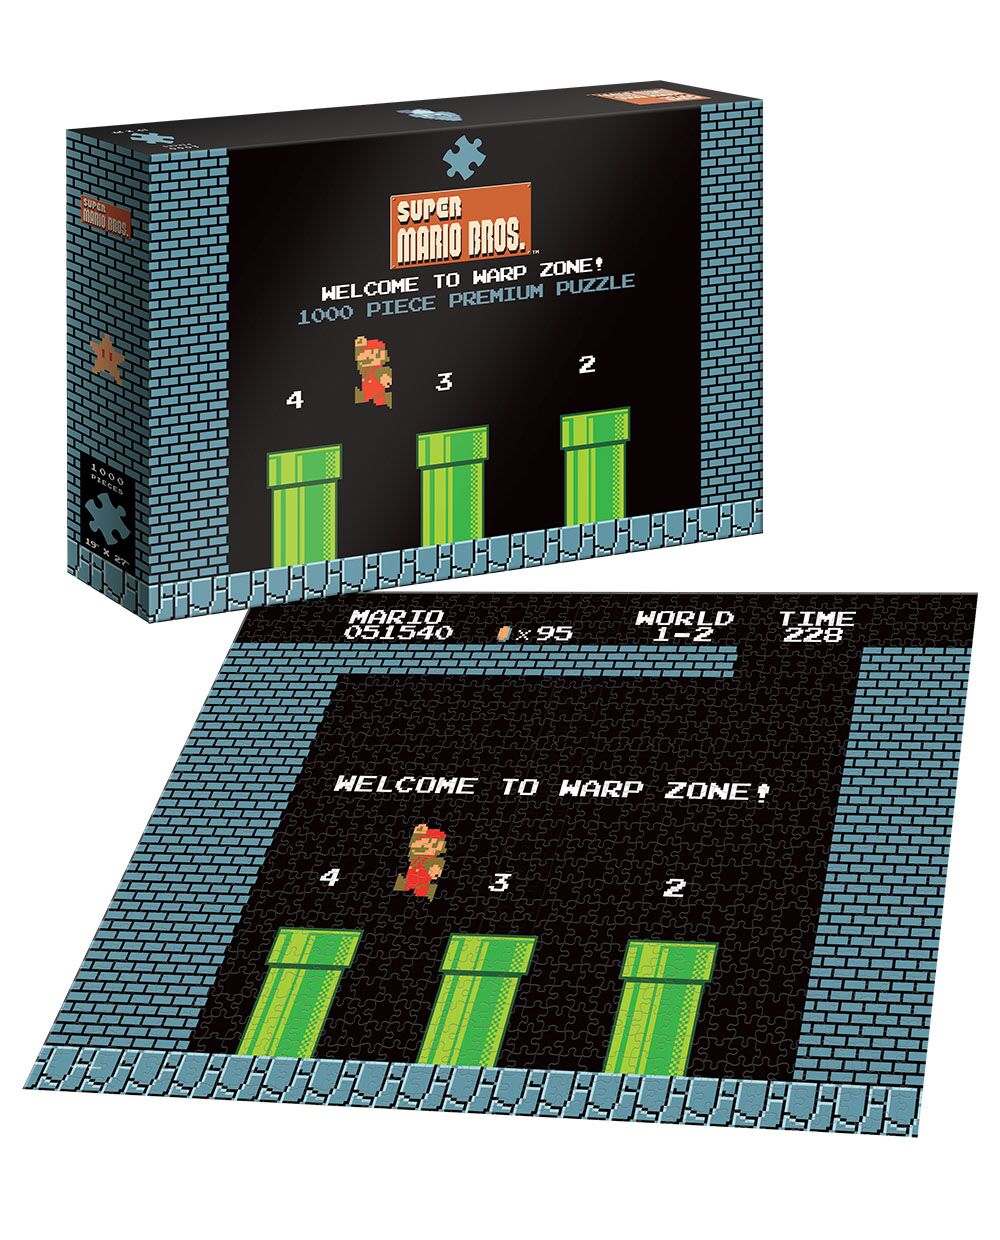 NEW USAopoly Super Mario Bros World 1-2 Welcome To Warp Zone 1000 Piece Puzzle 